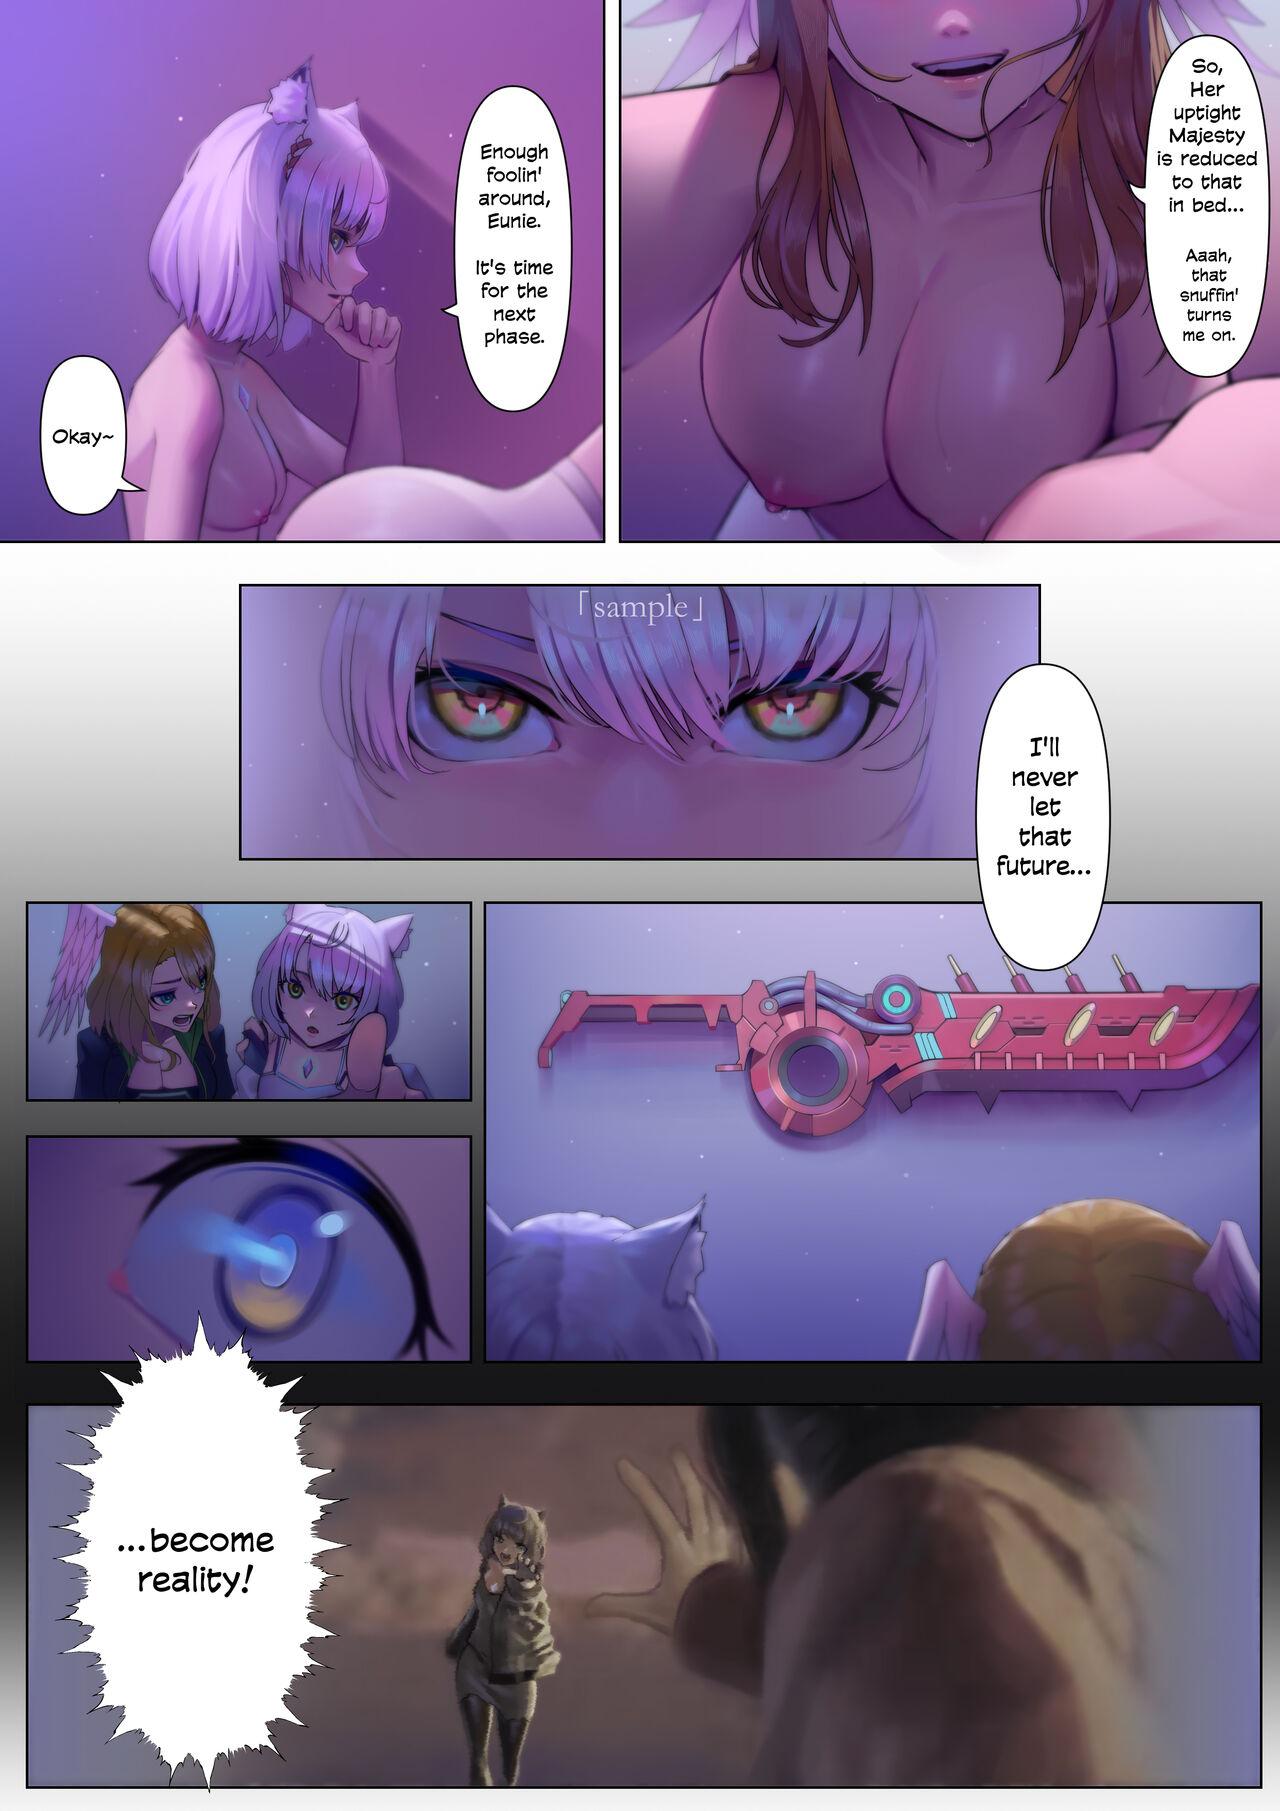 Stepmom 《Xe○blade3》Doujinshi Request - Xenoblade chronicles 3 Chilena - Page 11